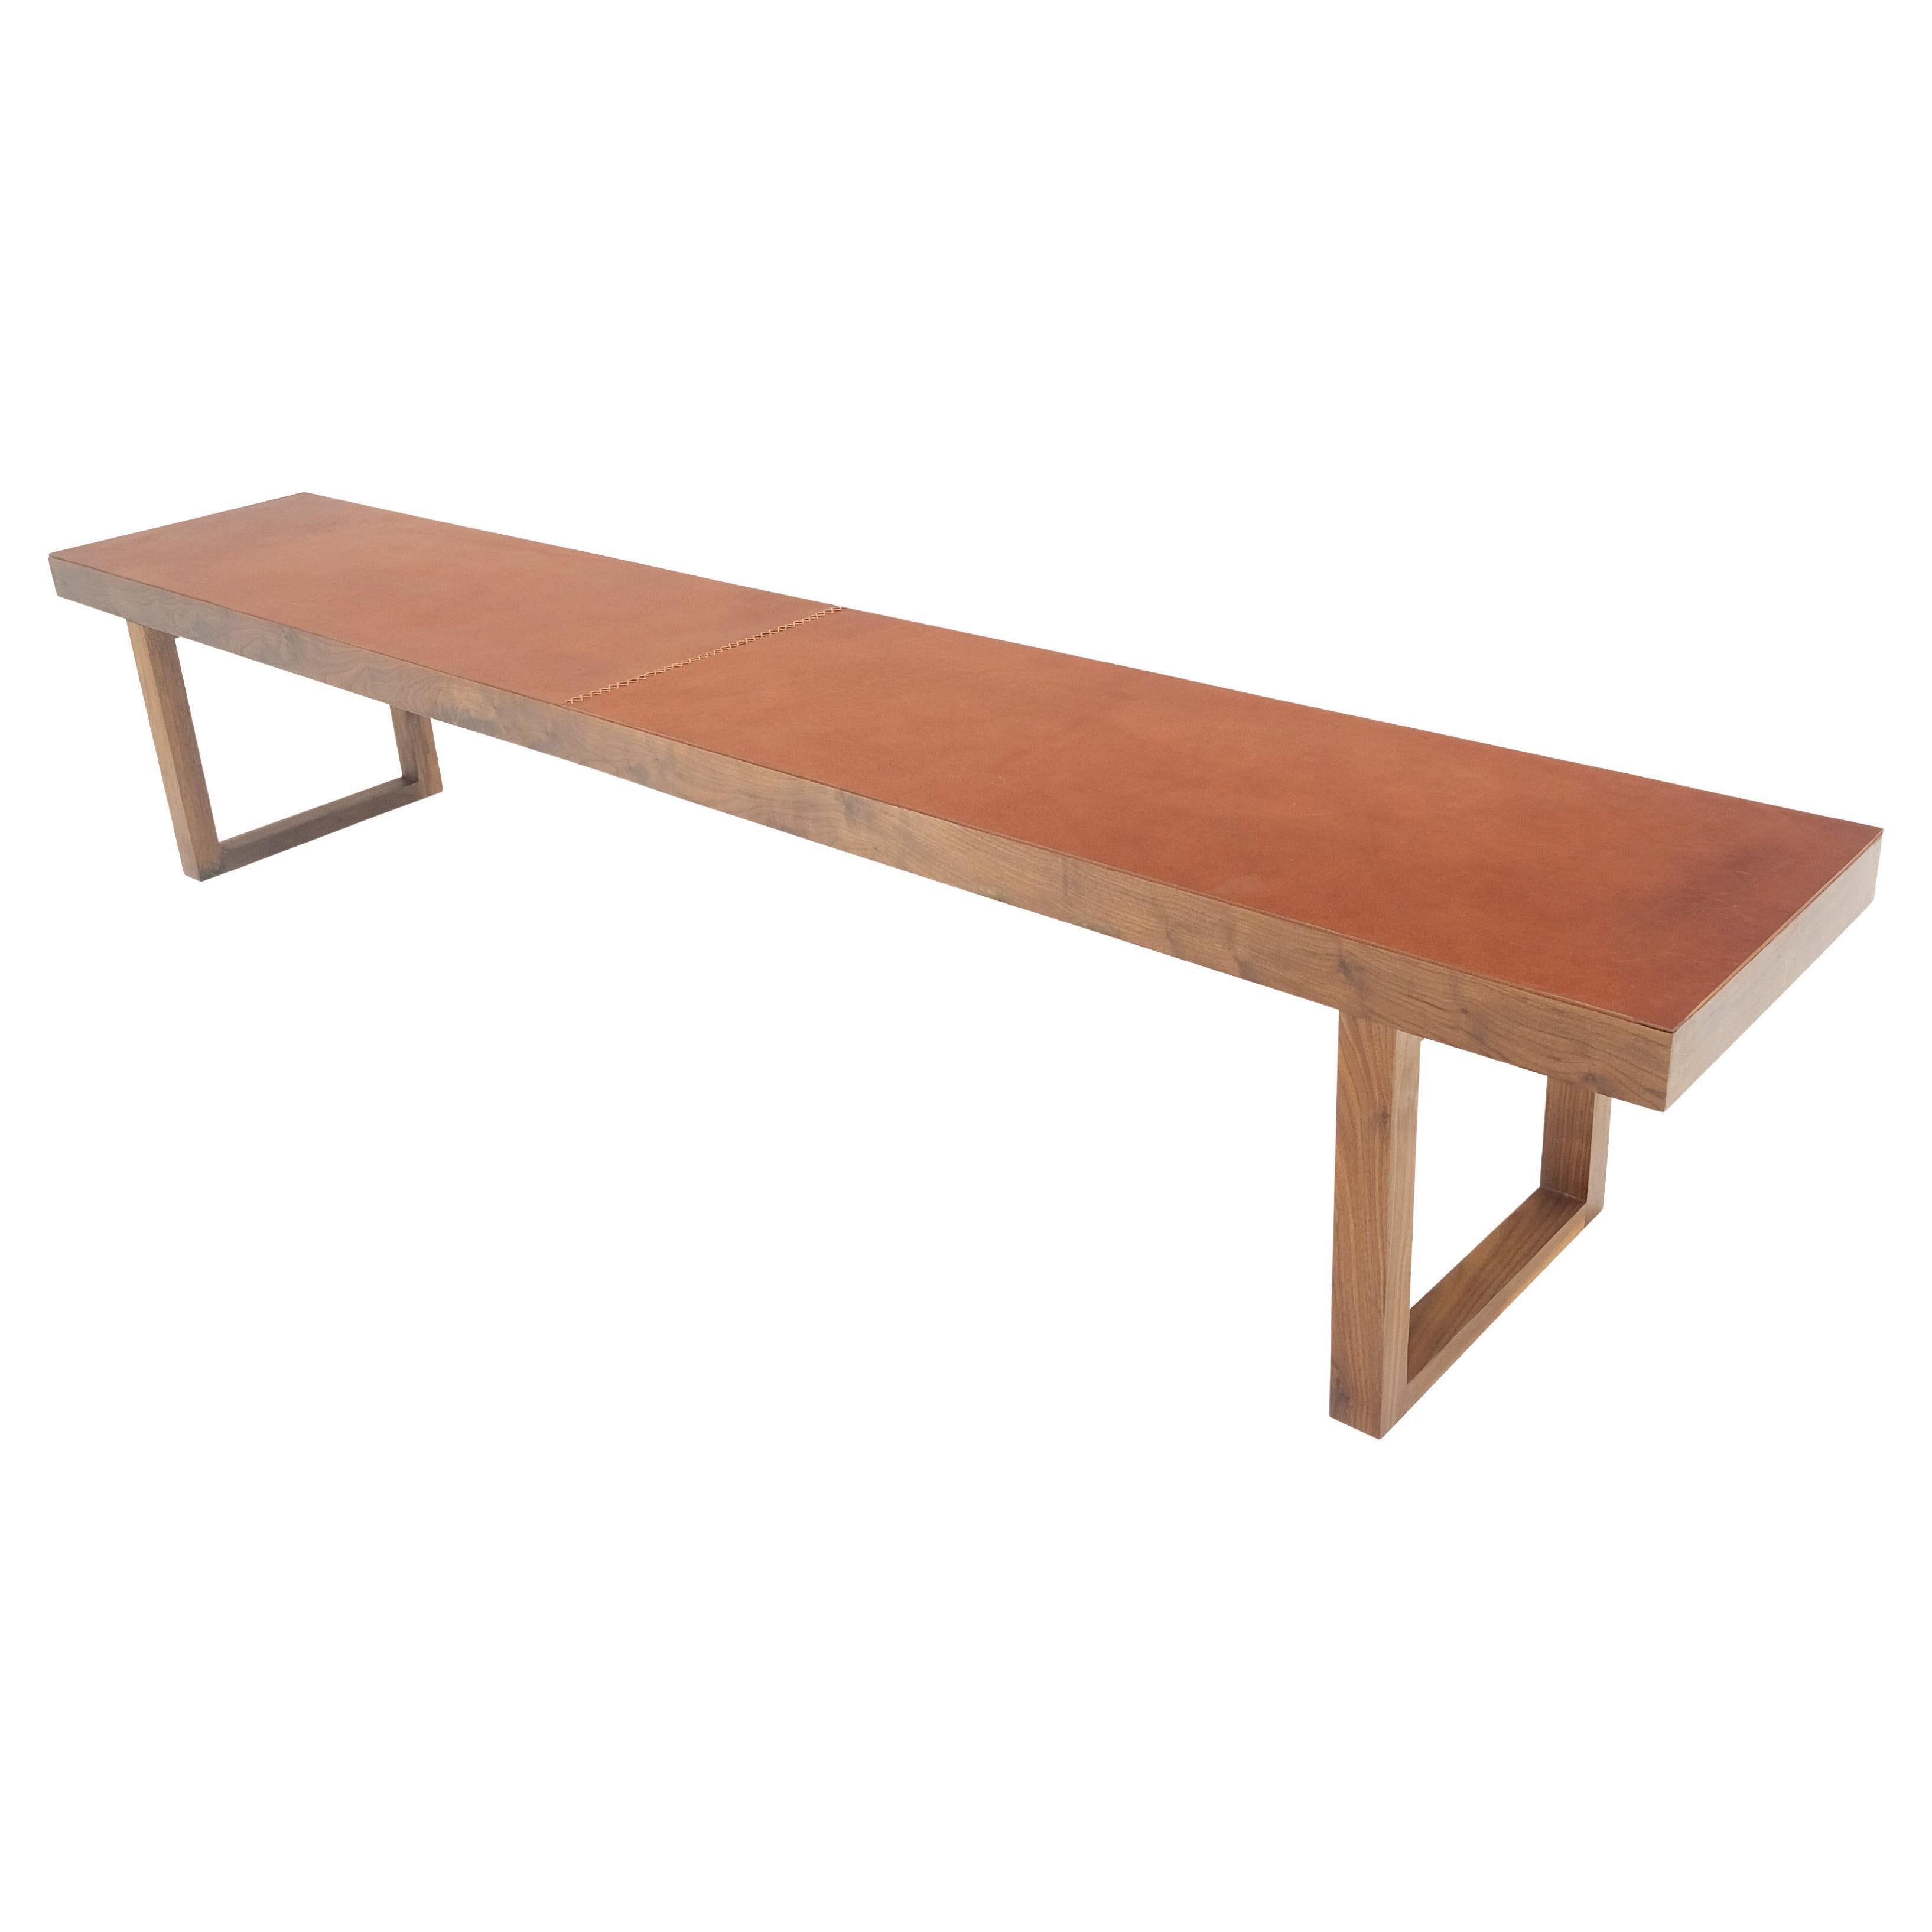 Slim Profile Solid Walnut Frame Integrated leather Cushion 7.5' Long Bench For Sale 4